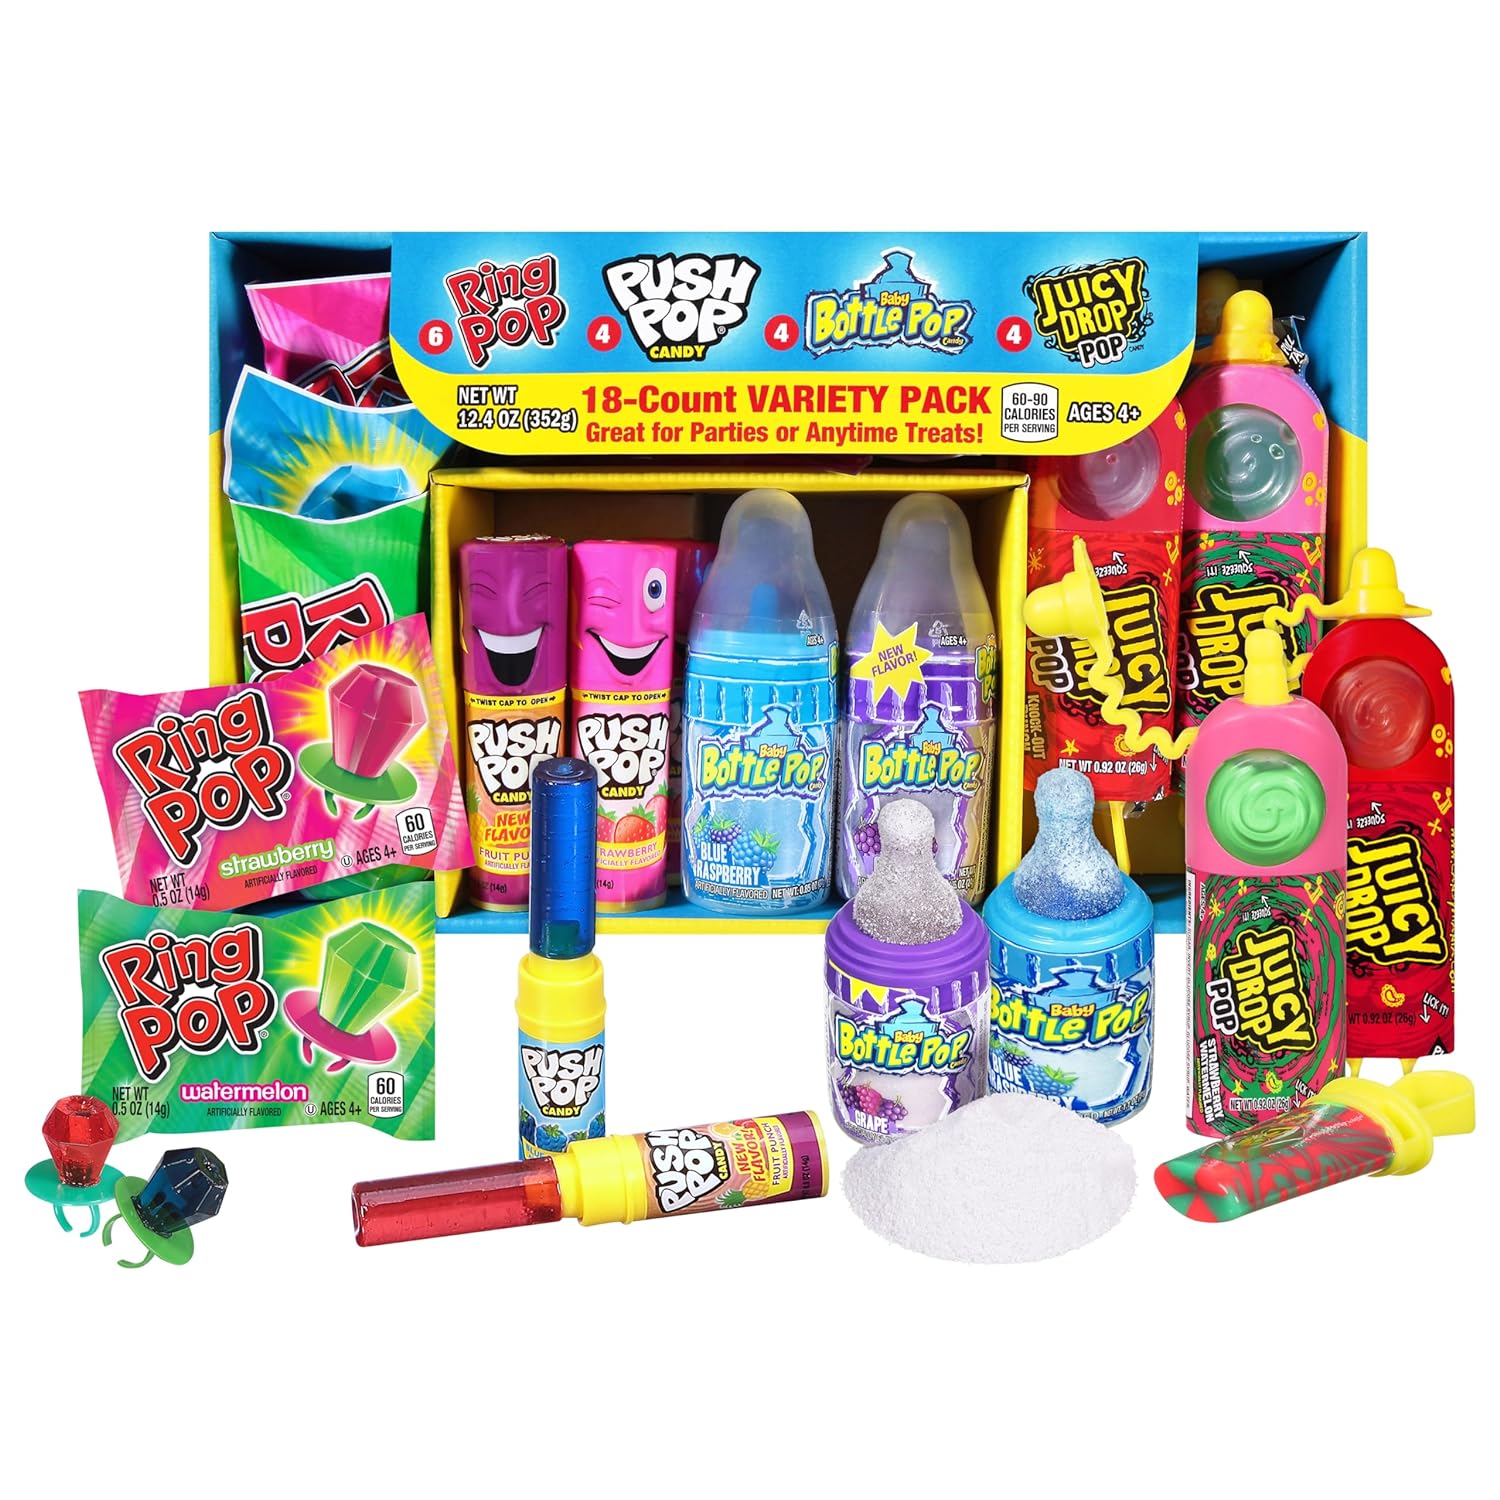 Bazooka Candy Brands Holiday Candy Variety Pack 18 Count:Fun Bulk Candy for Kids from Ring Pop,Push Pop,Baby Bottle Pop&Juicy Drop-Candy Gift Box for Birthdays,Party Favors,Stocking Stuffers